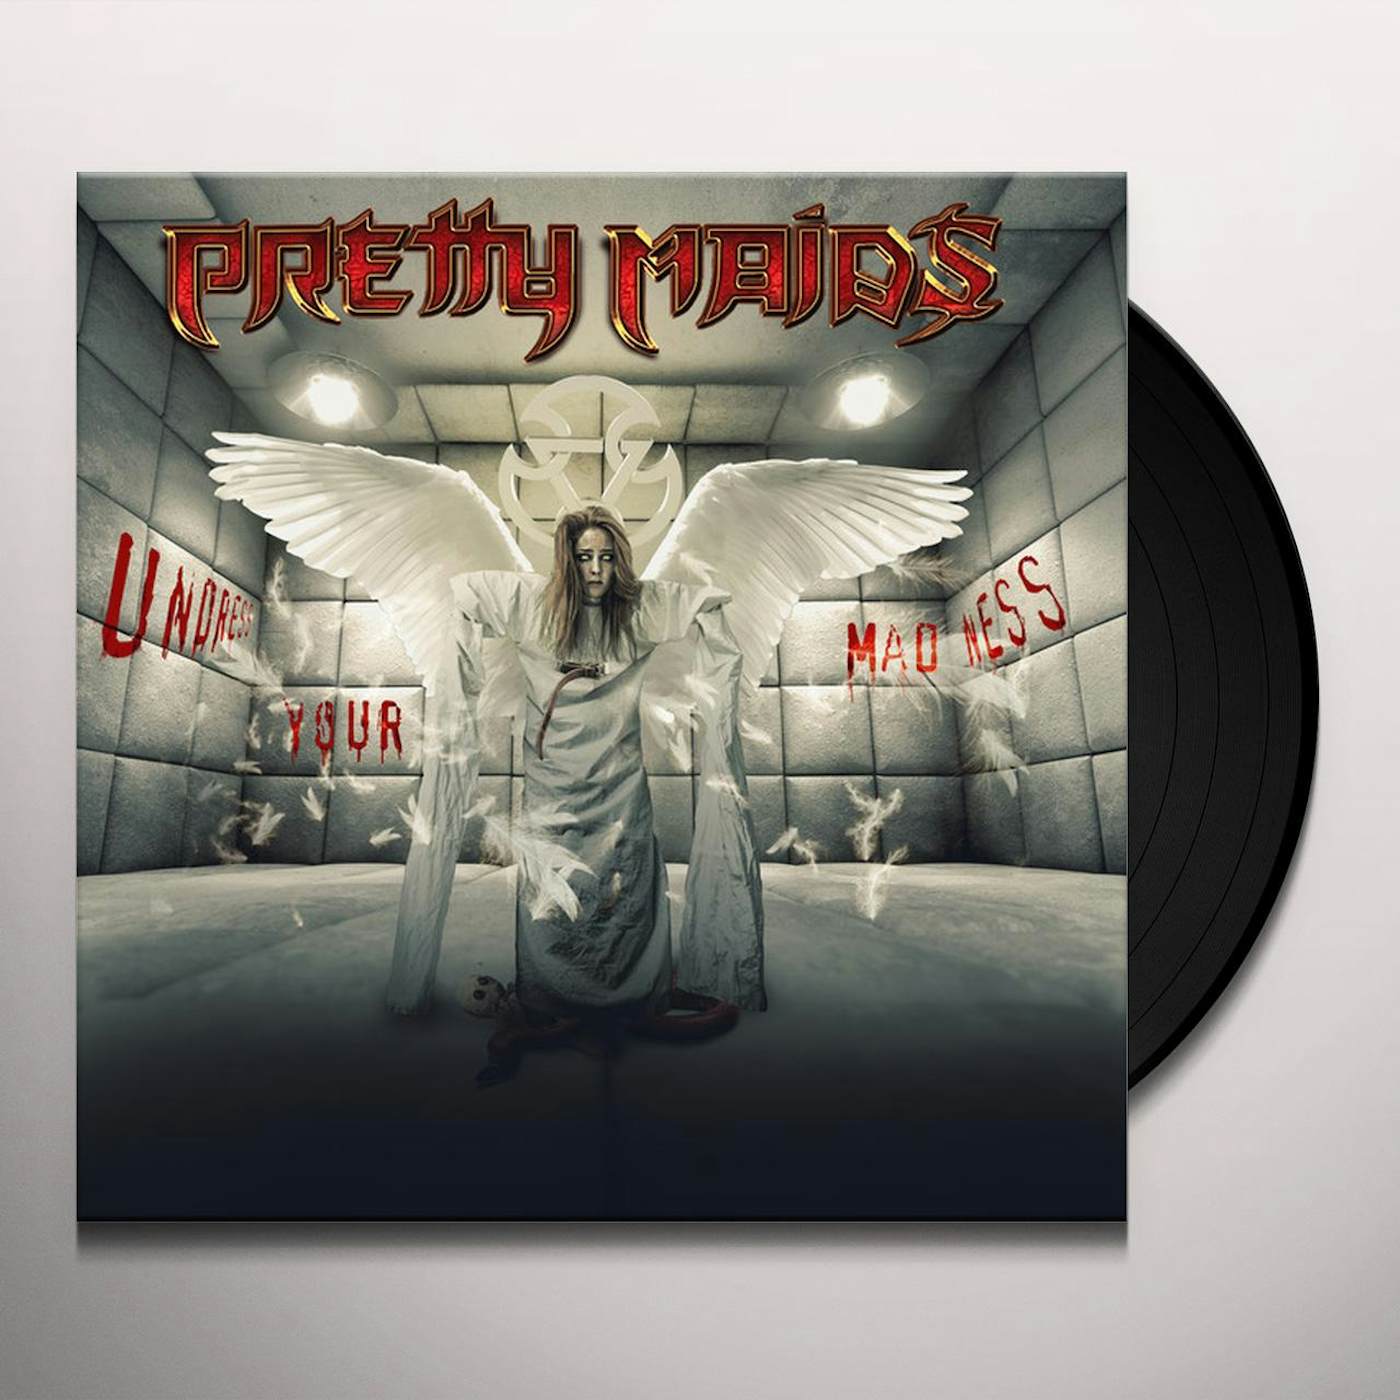 Pretty Maids UNDRESS YOUR MADNESS Vinyl Record